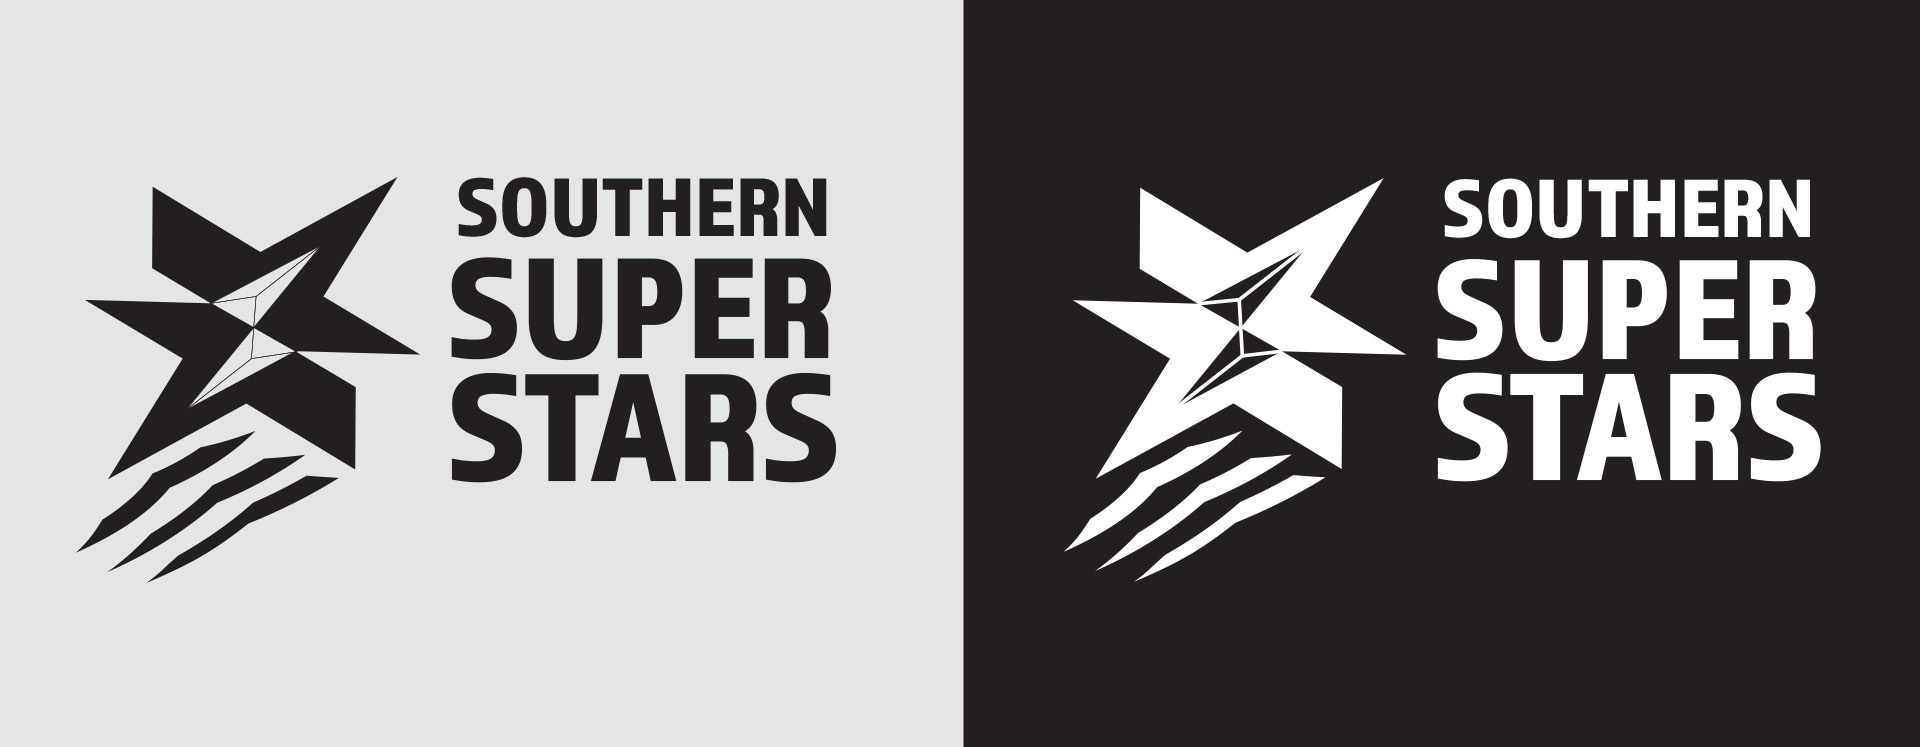 southern super stars Image - Signatures1